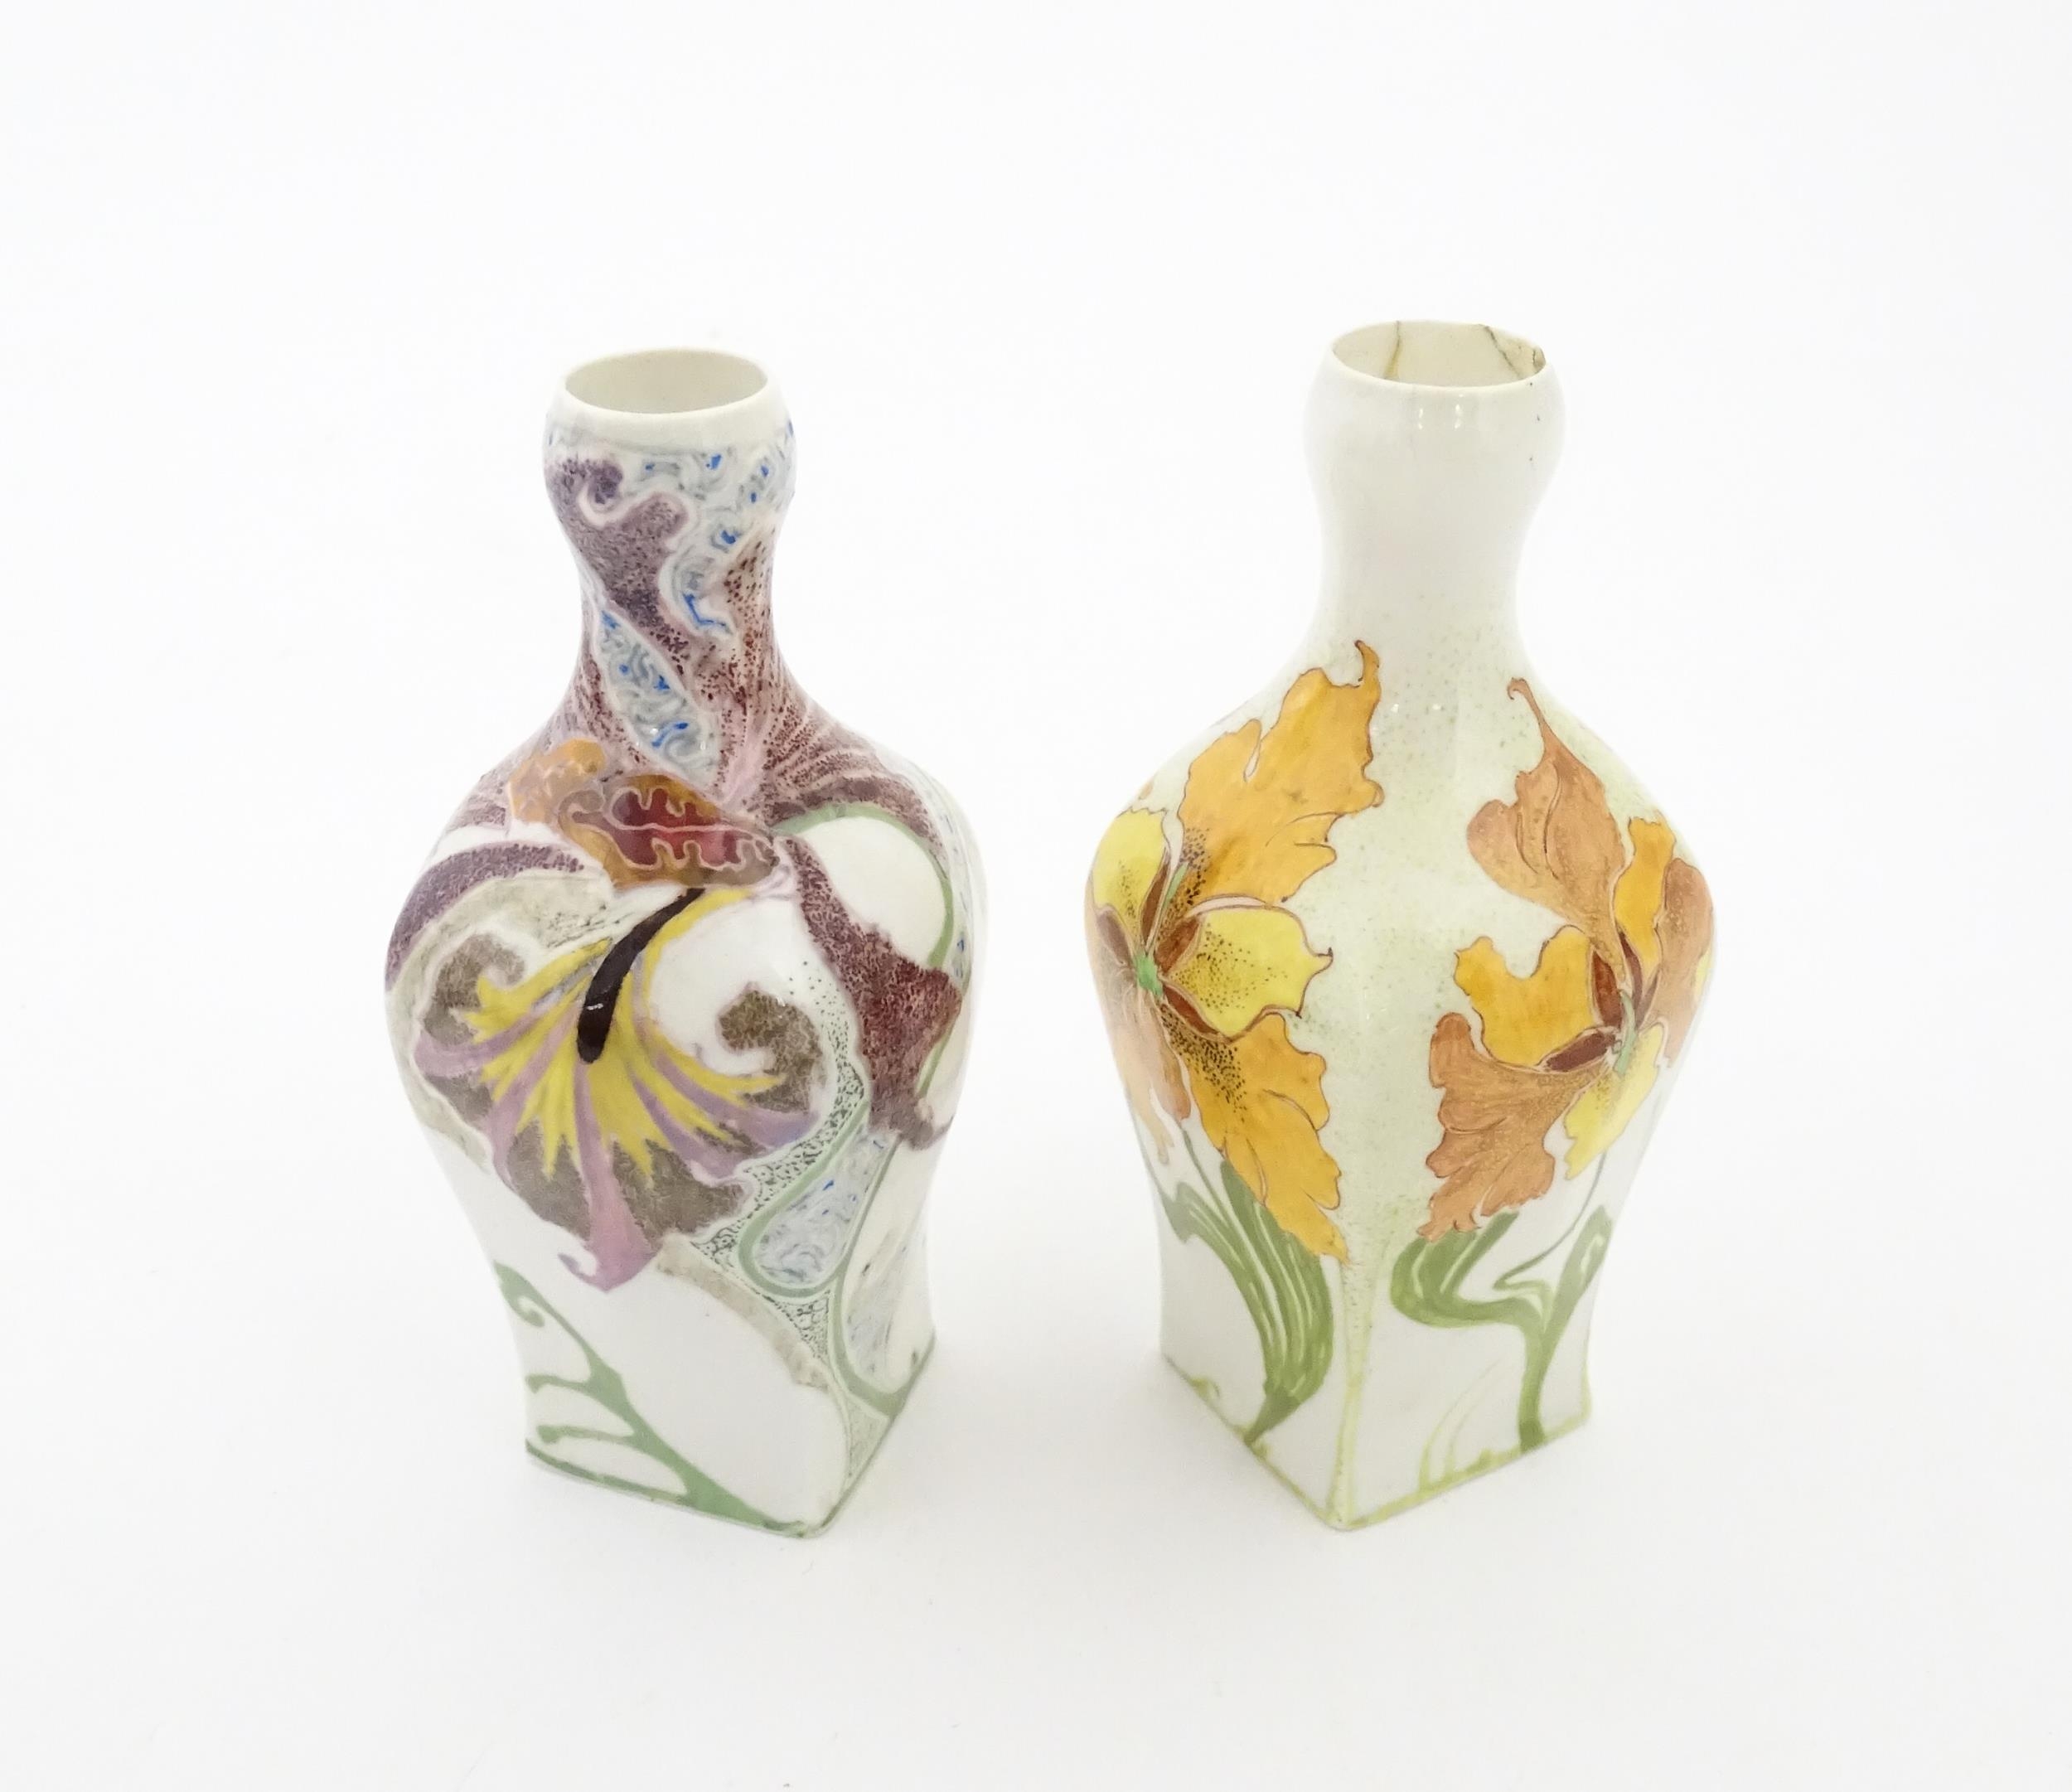 Two Rozenburg eggshell porcelain vases, one decorated with purple flowers, the other with orange - Image 4 of 8